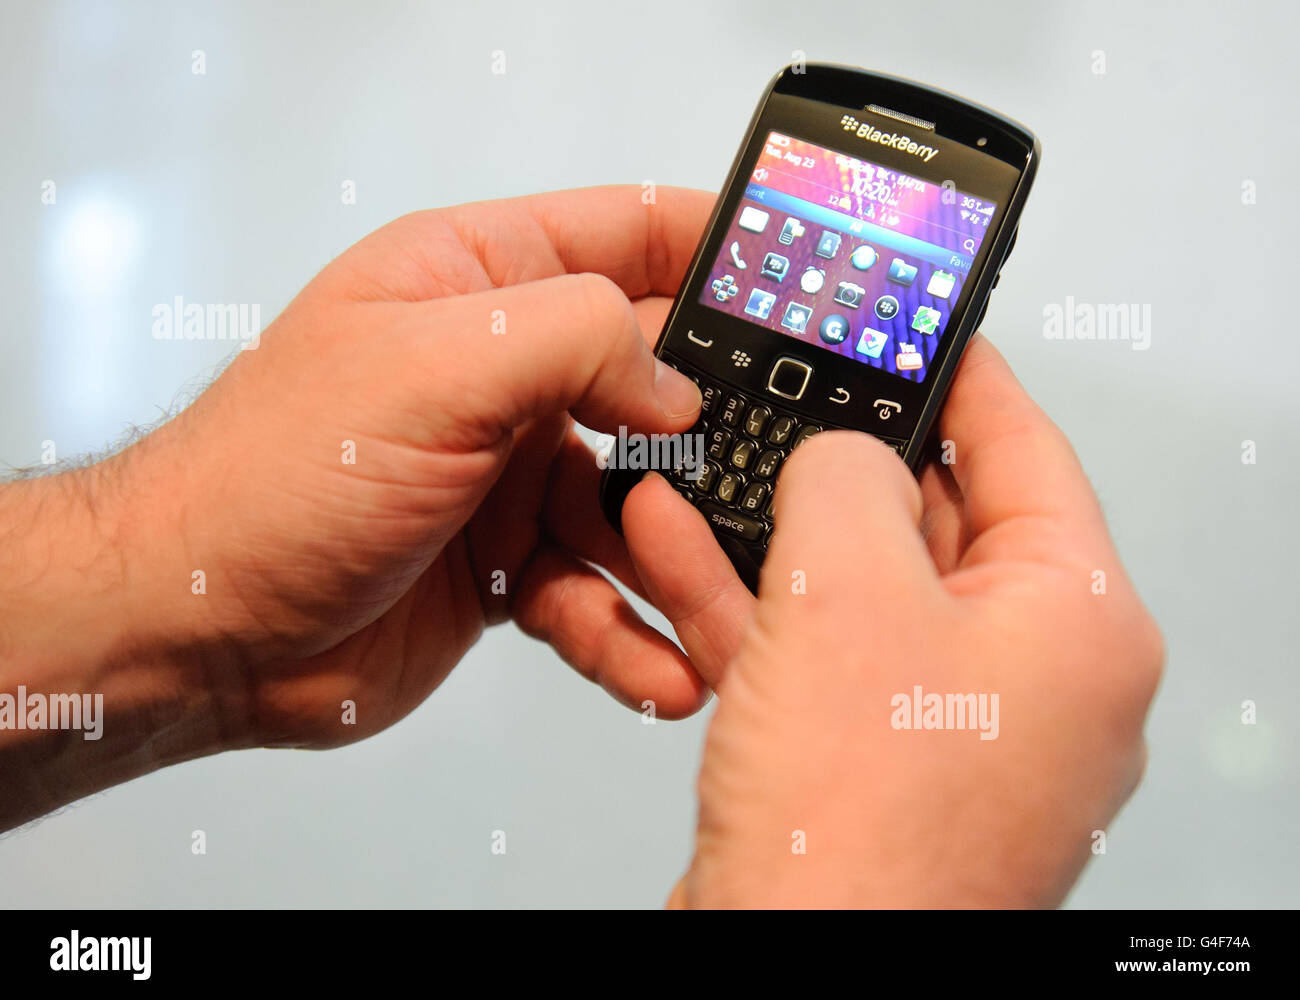 The new BlackBerry Curve 9360 smartphone, which features the BlackBerry 7 Operating System, at a press preview event at BAFTA in central London. Stock Photo